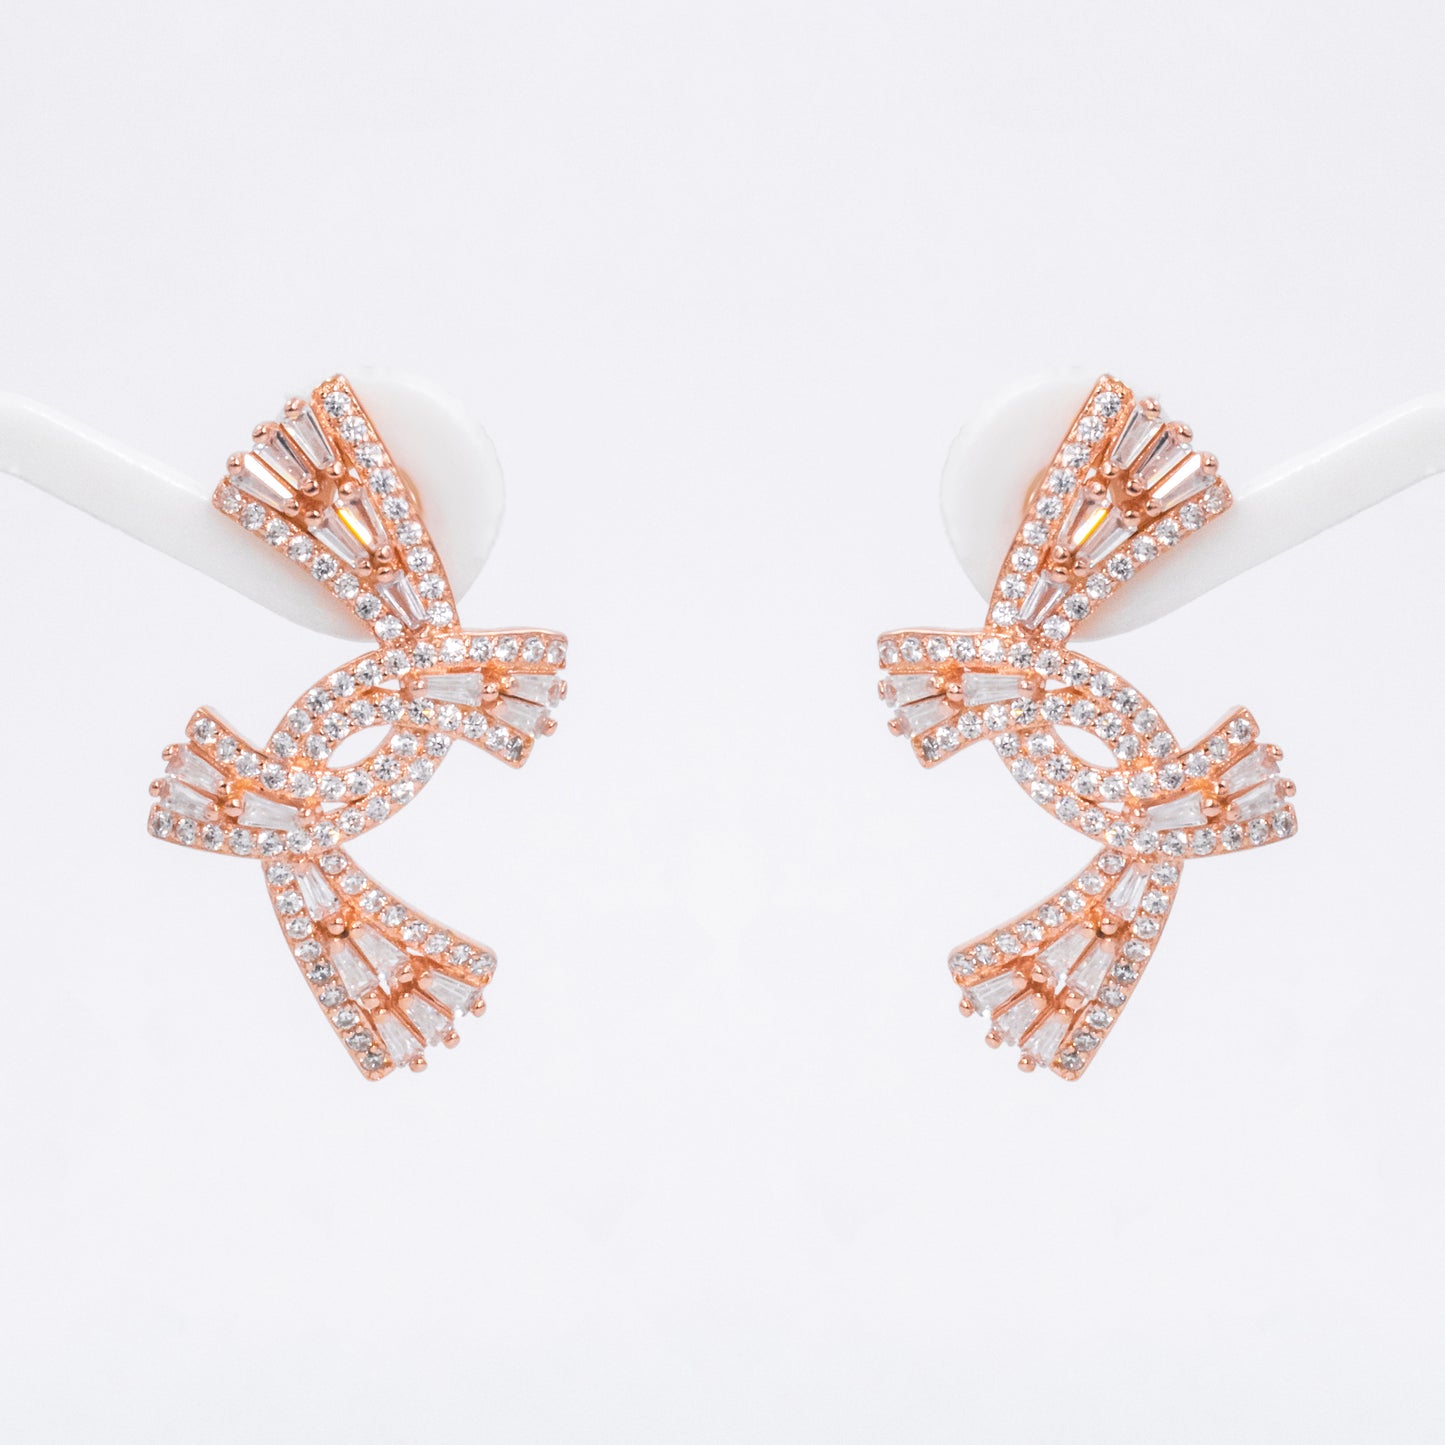 Rose Gold Intertwined Earrings